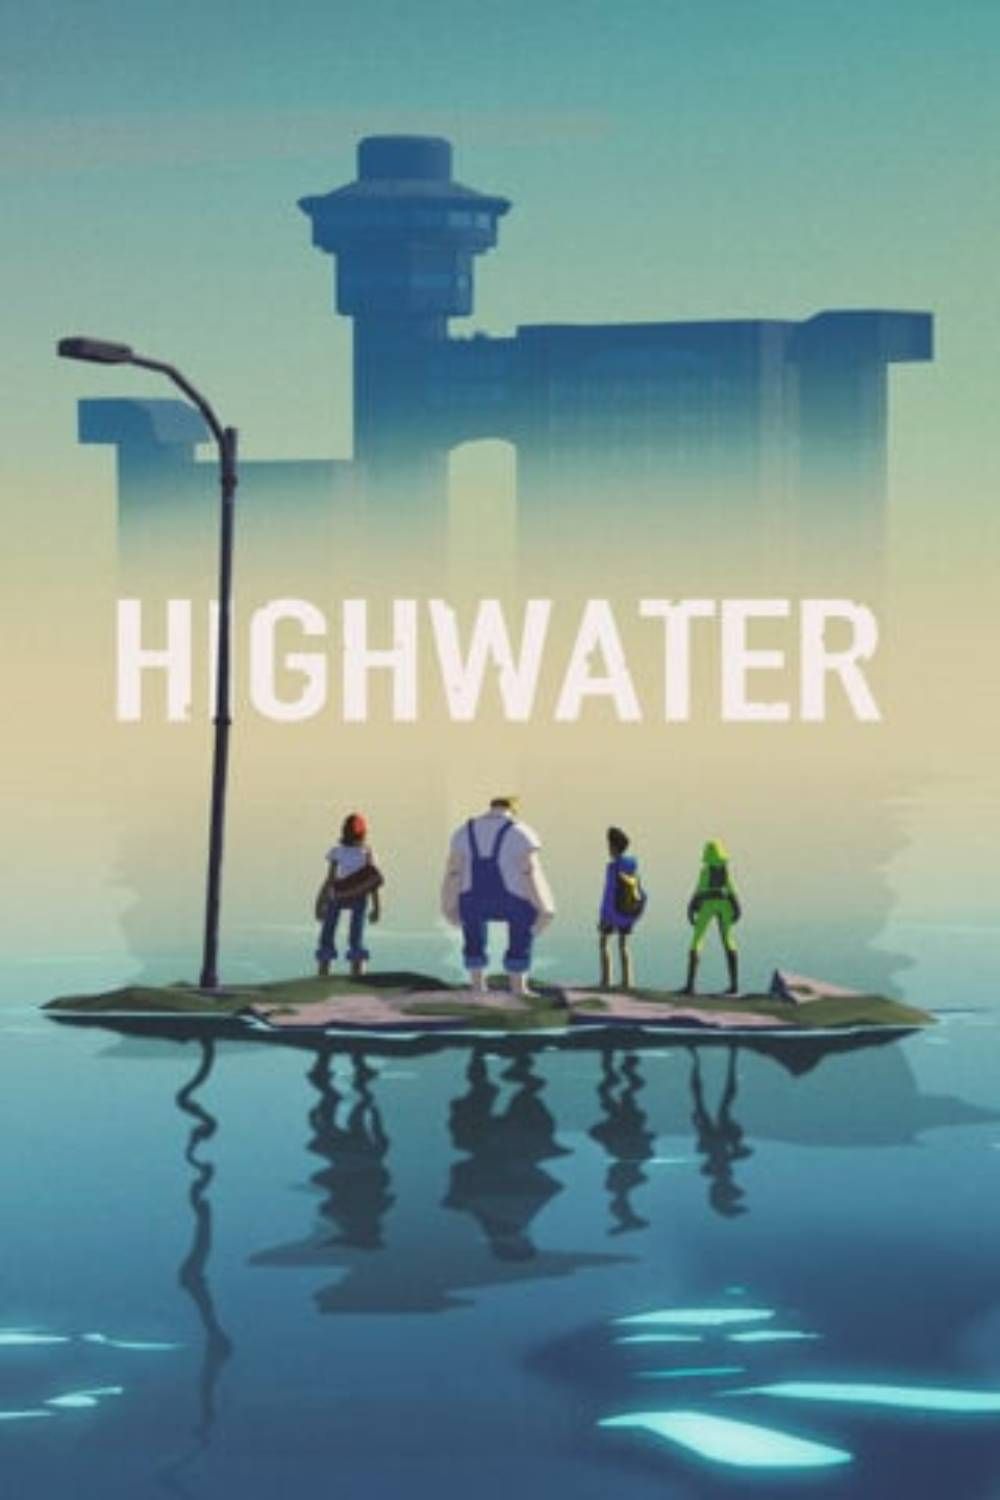 About – High Water